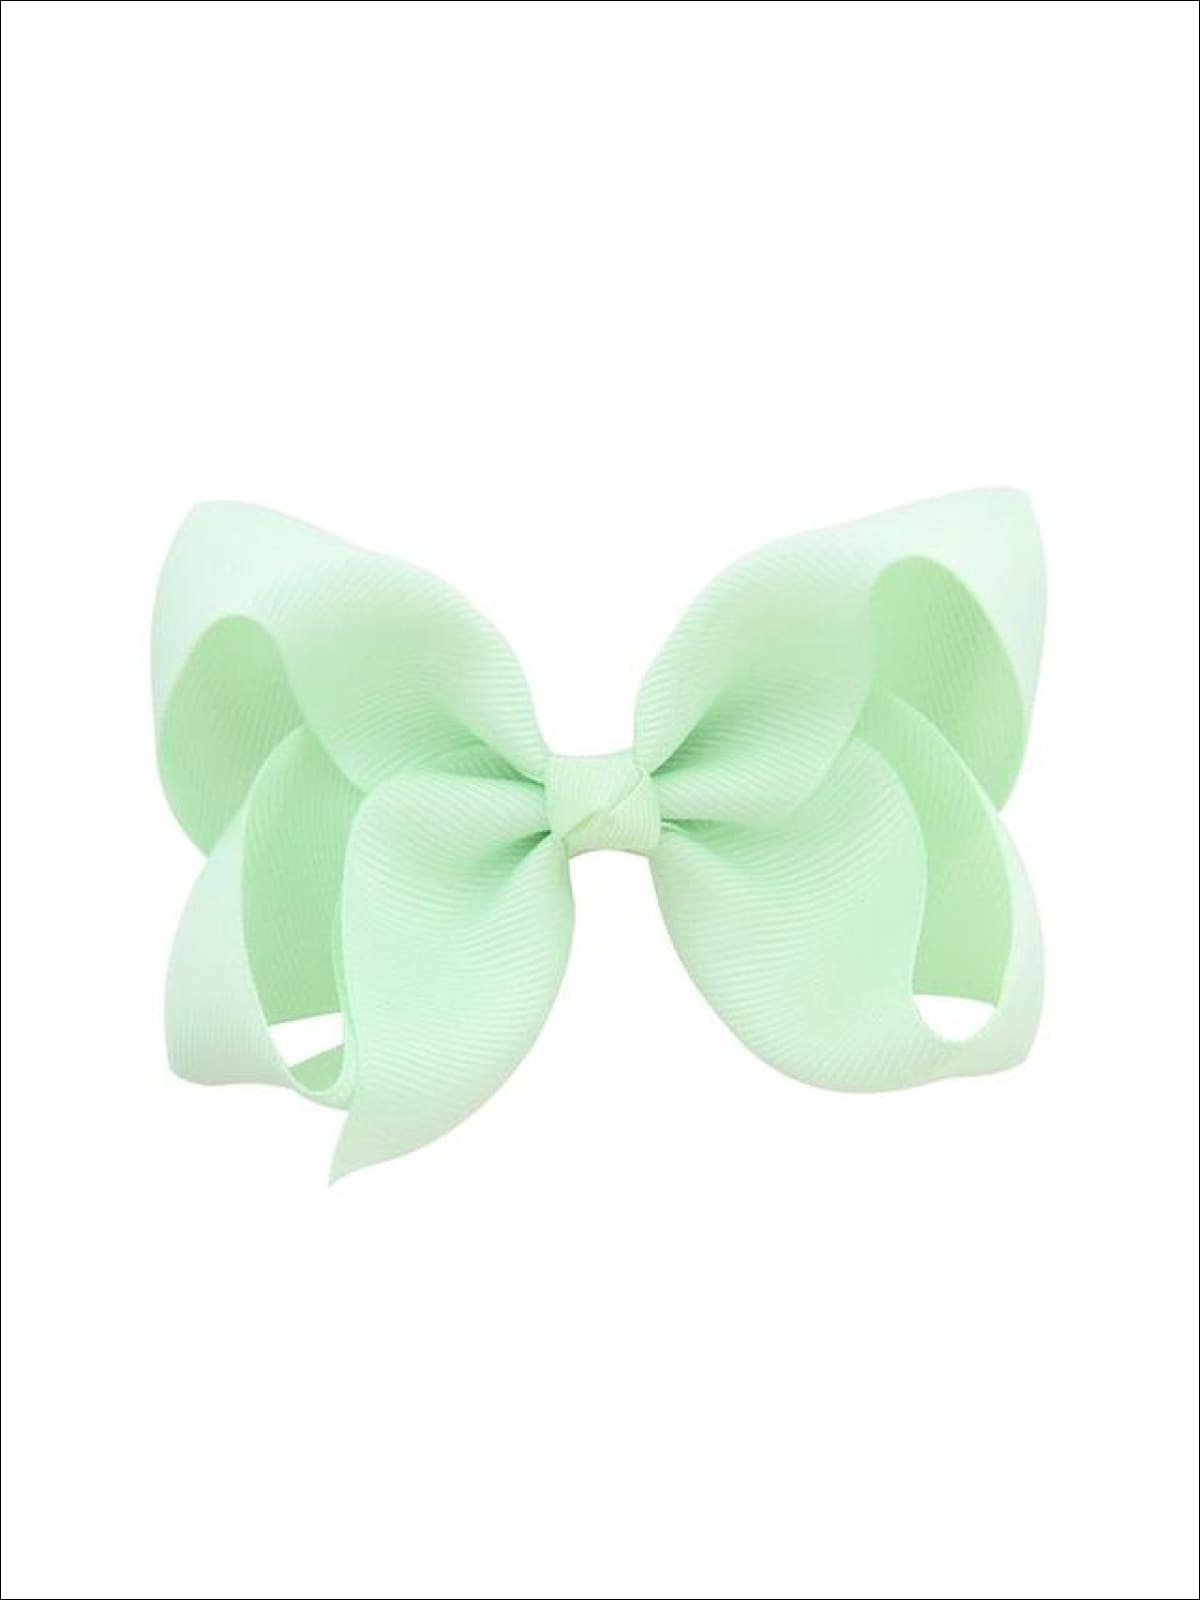 Girls Pastel Color Hair Bow Clip - Green / 3inch - Hair Accessories